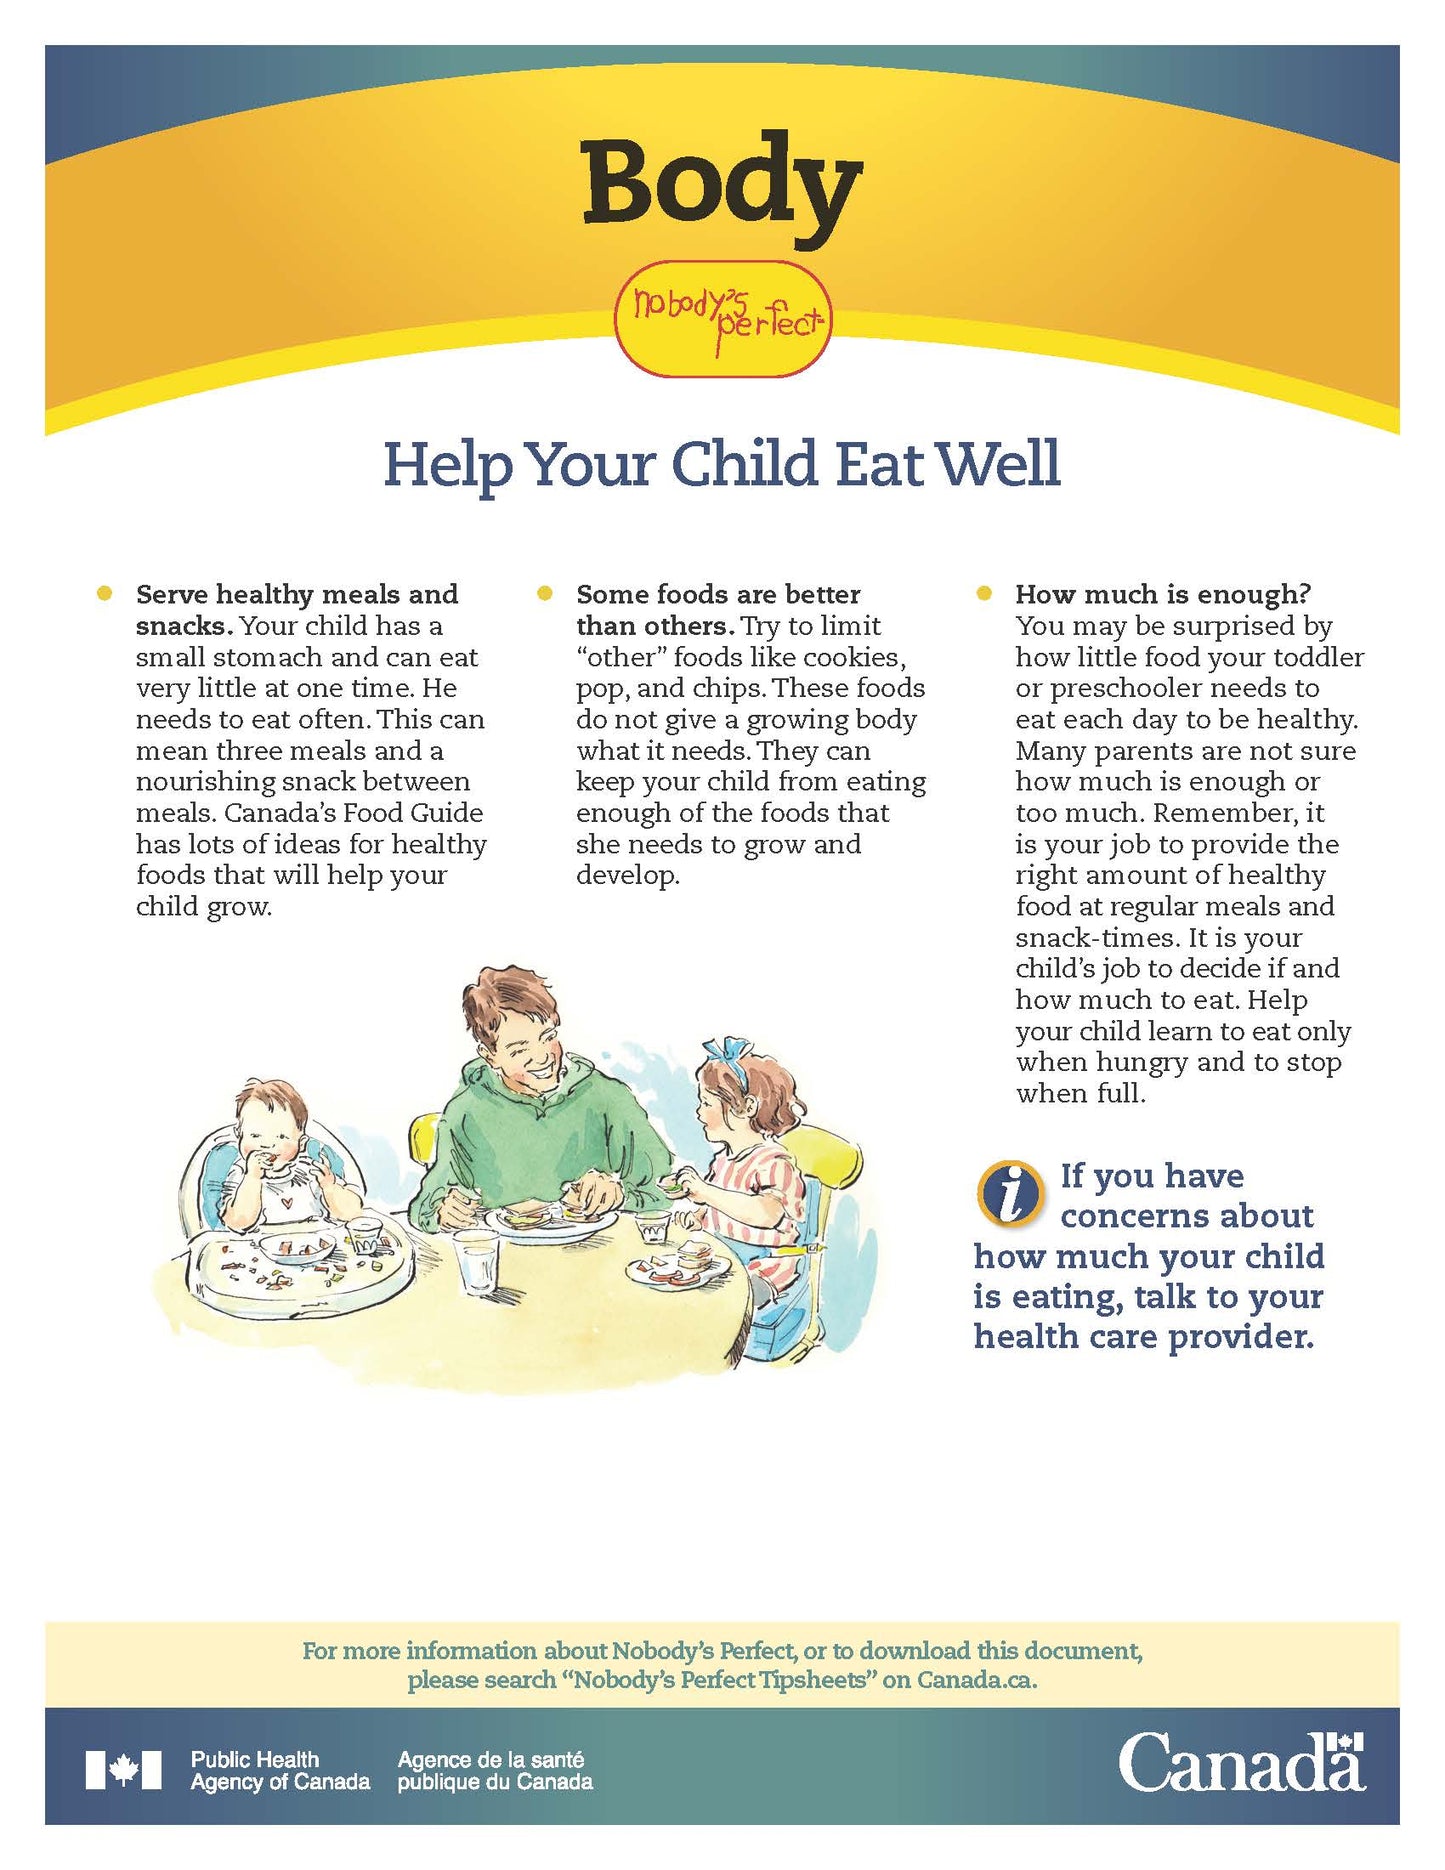 Nobody’s Perfect Tip Sheets - Body: Help Your Child Eat Well